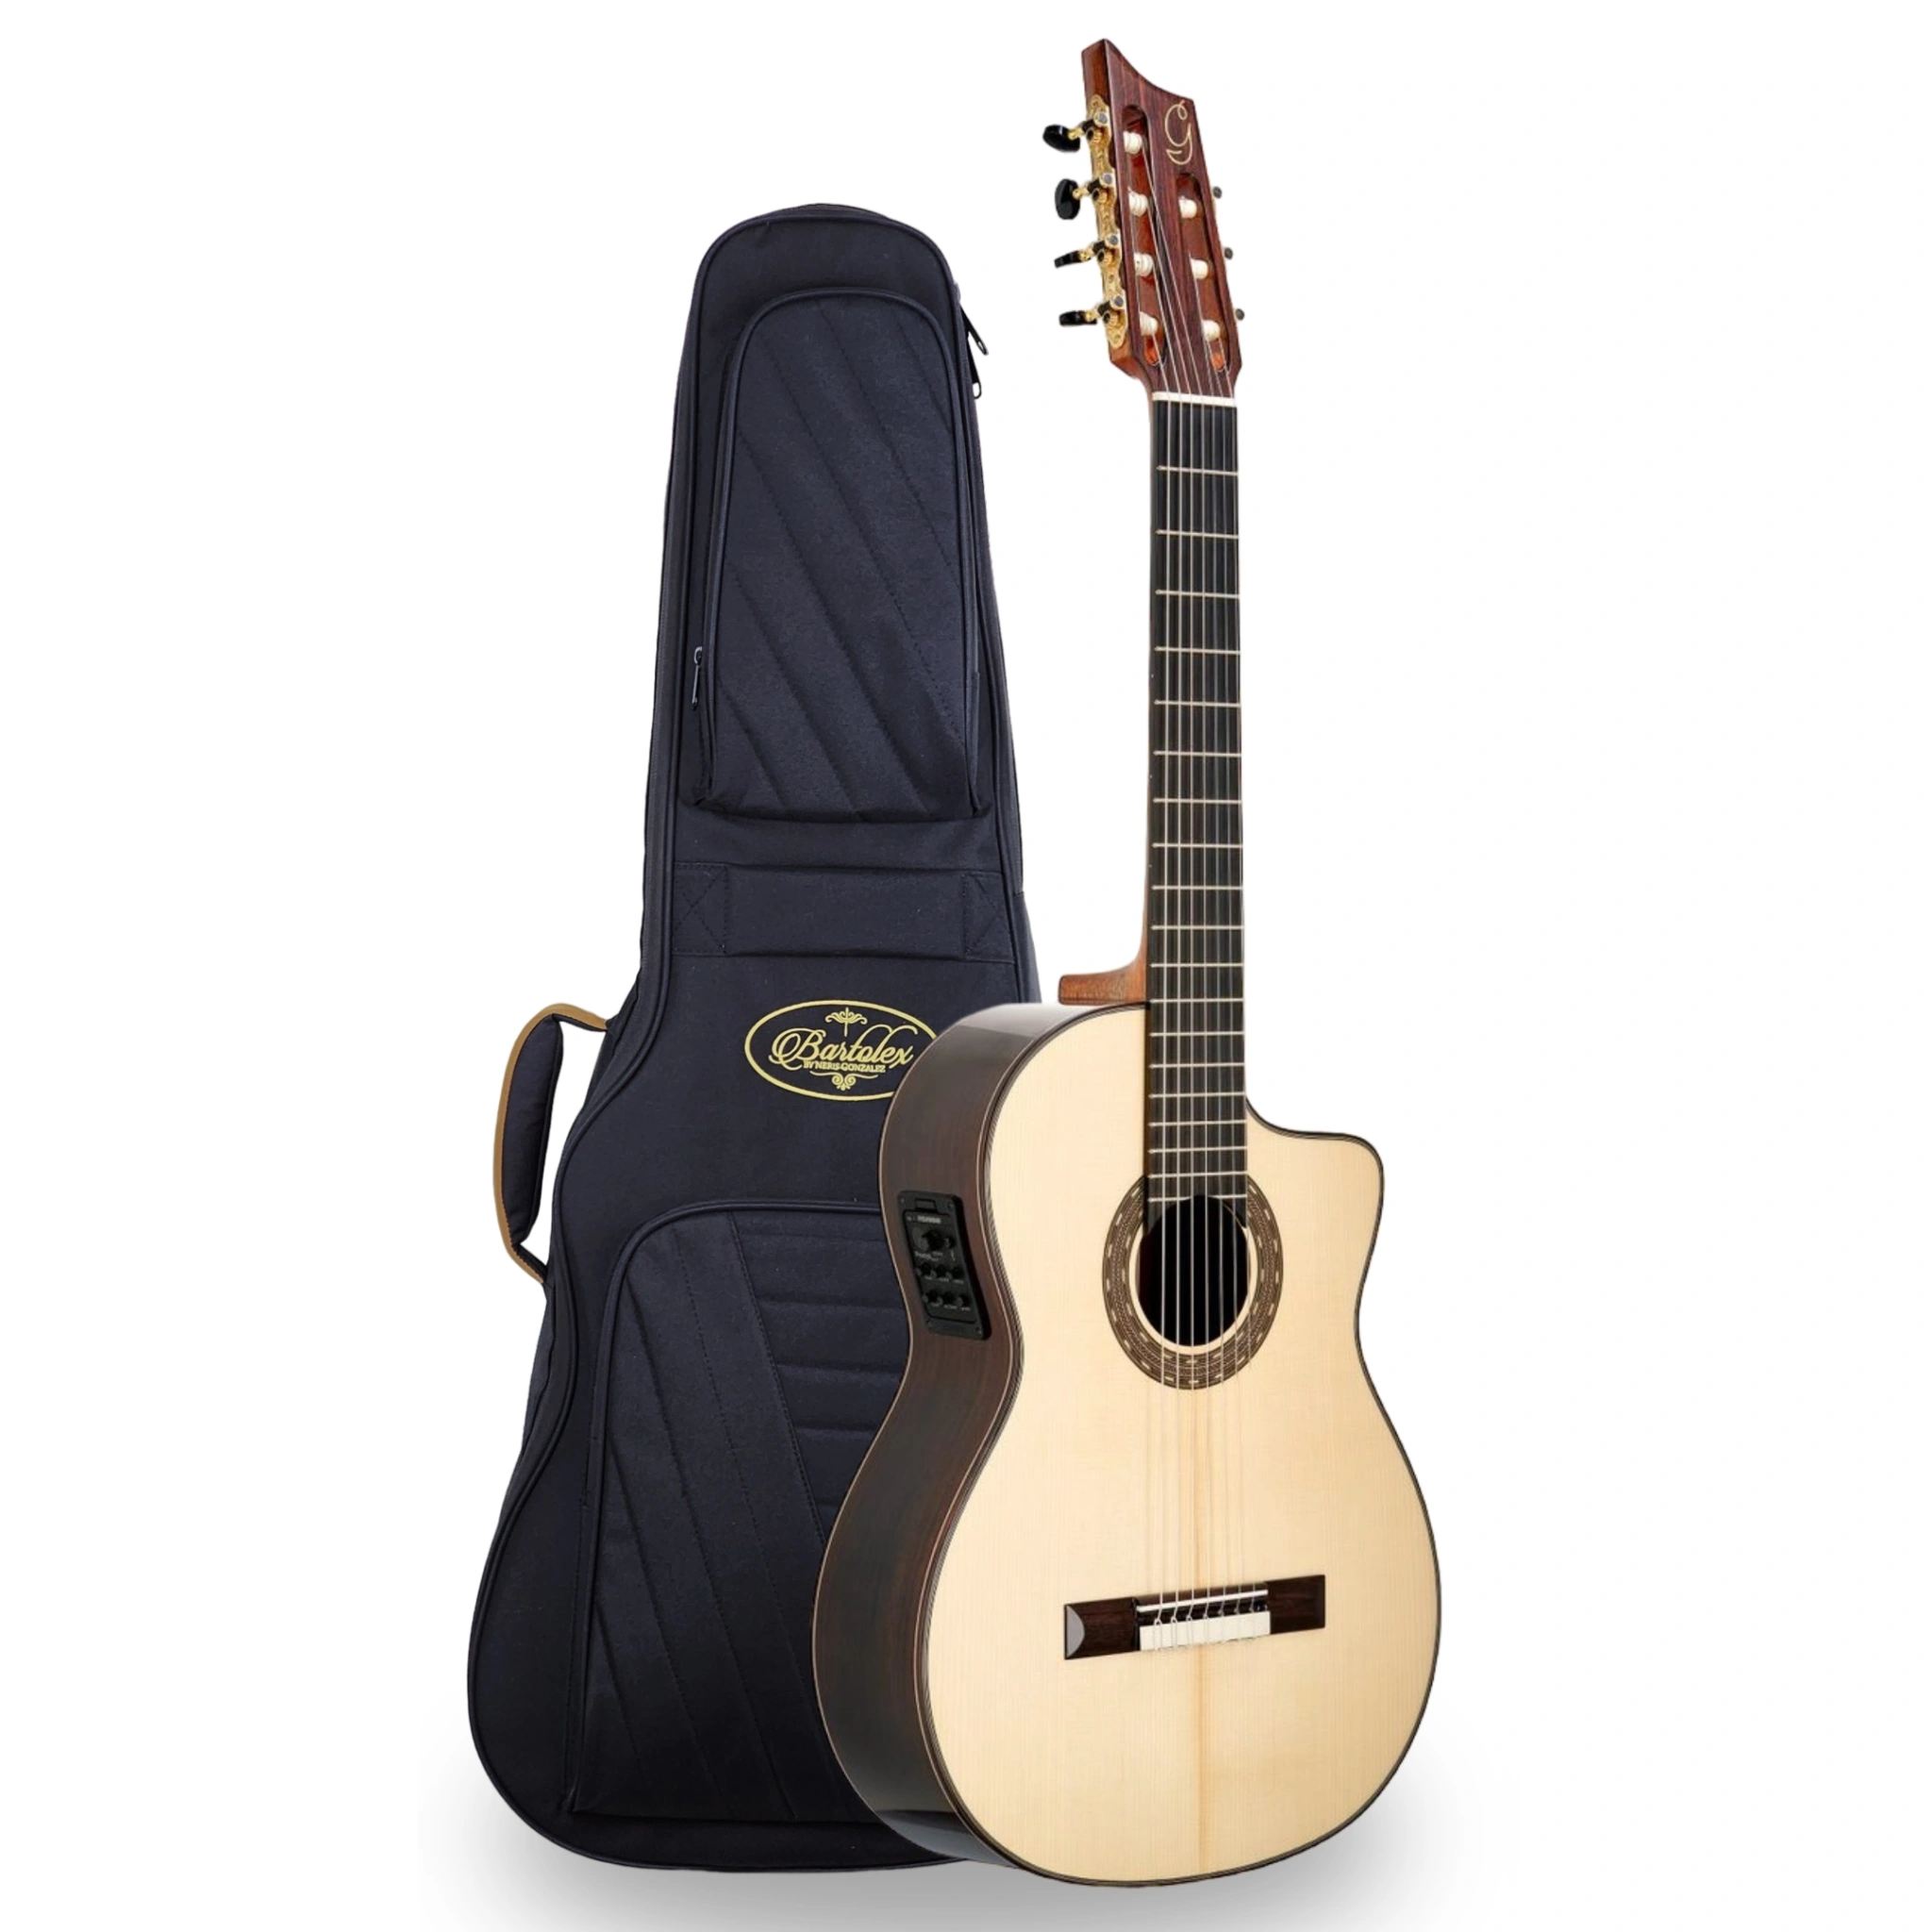 Gayetana - ATTO A77-S 7-String Classical Guitar Electro-Acoustic with Cutaway and Fishman System